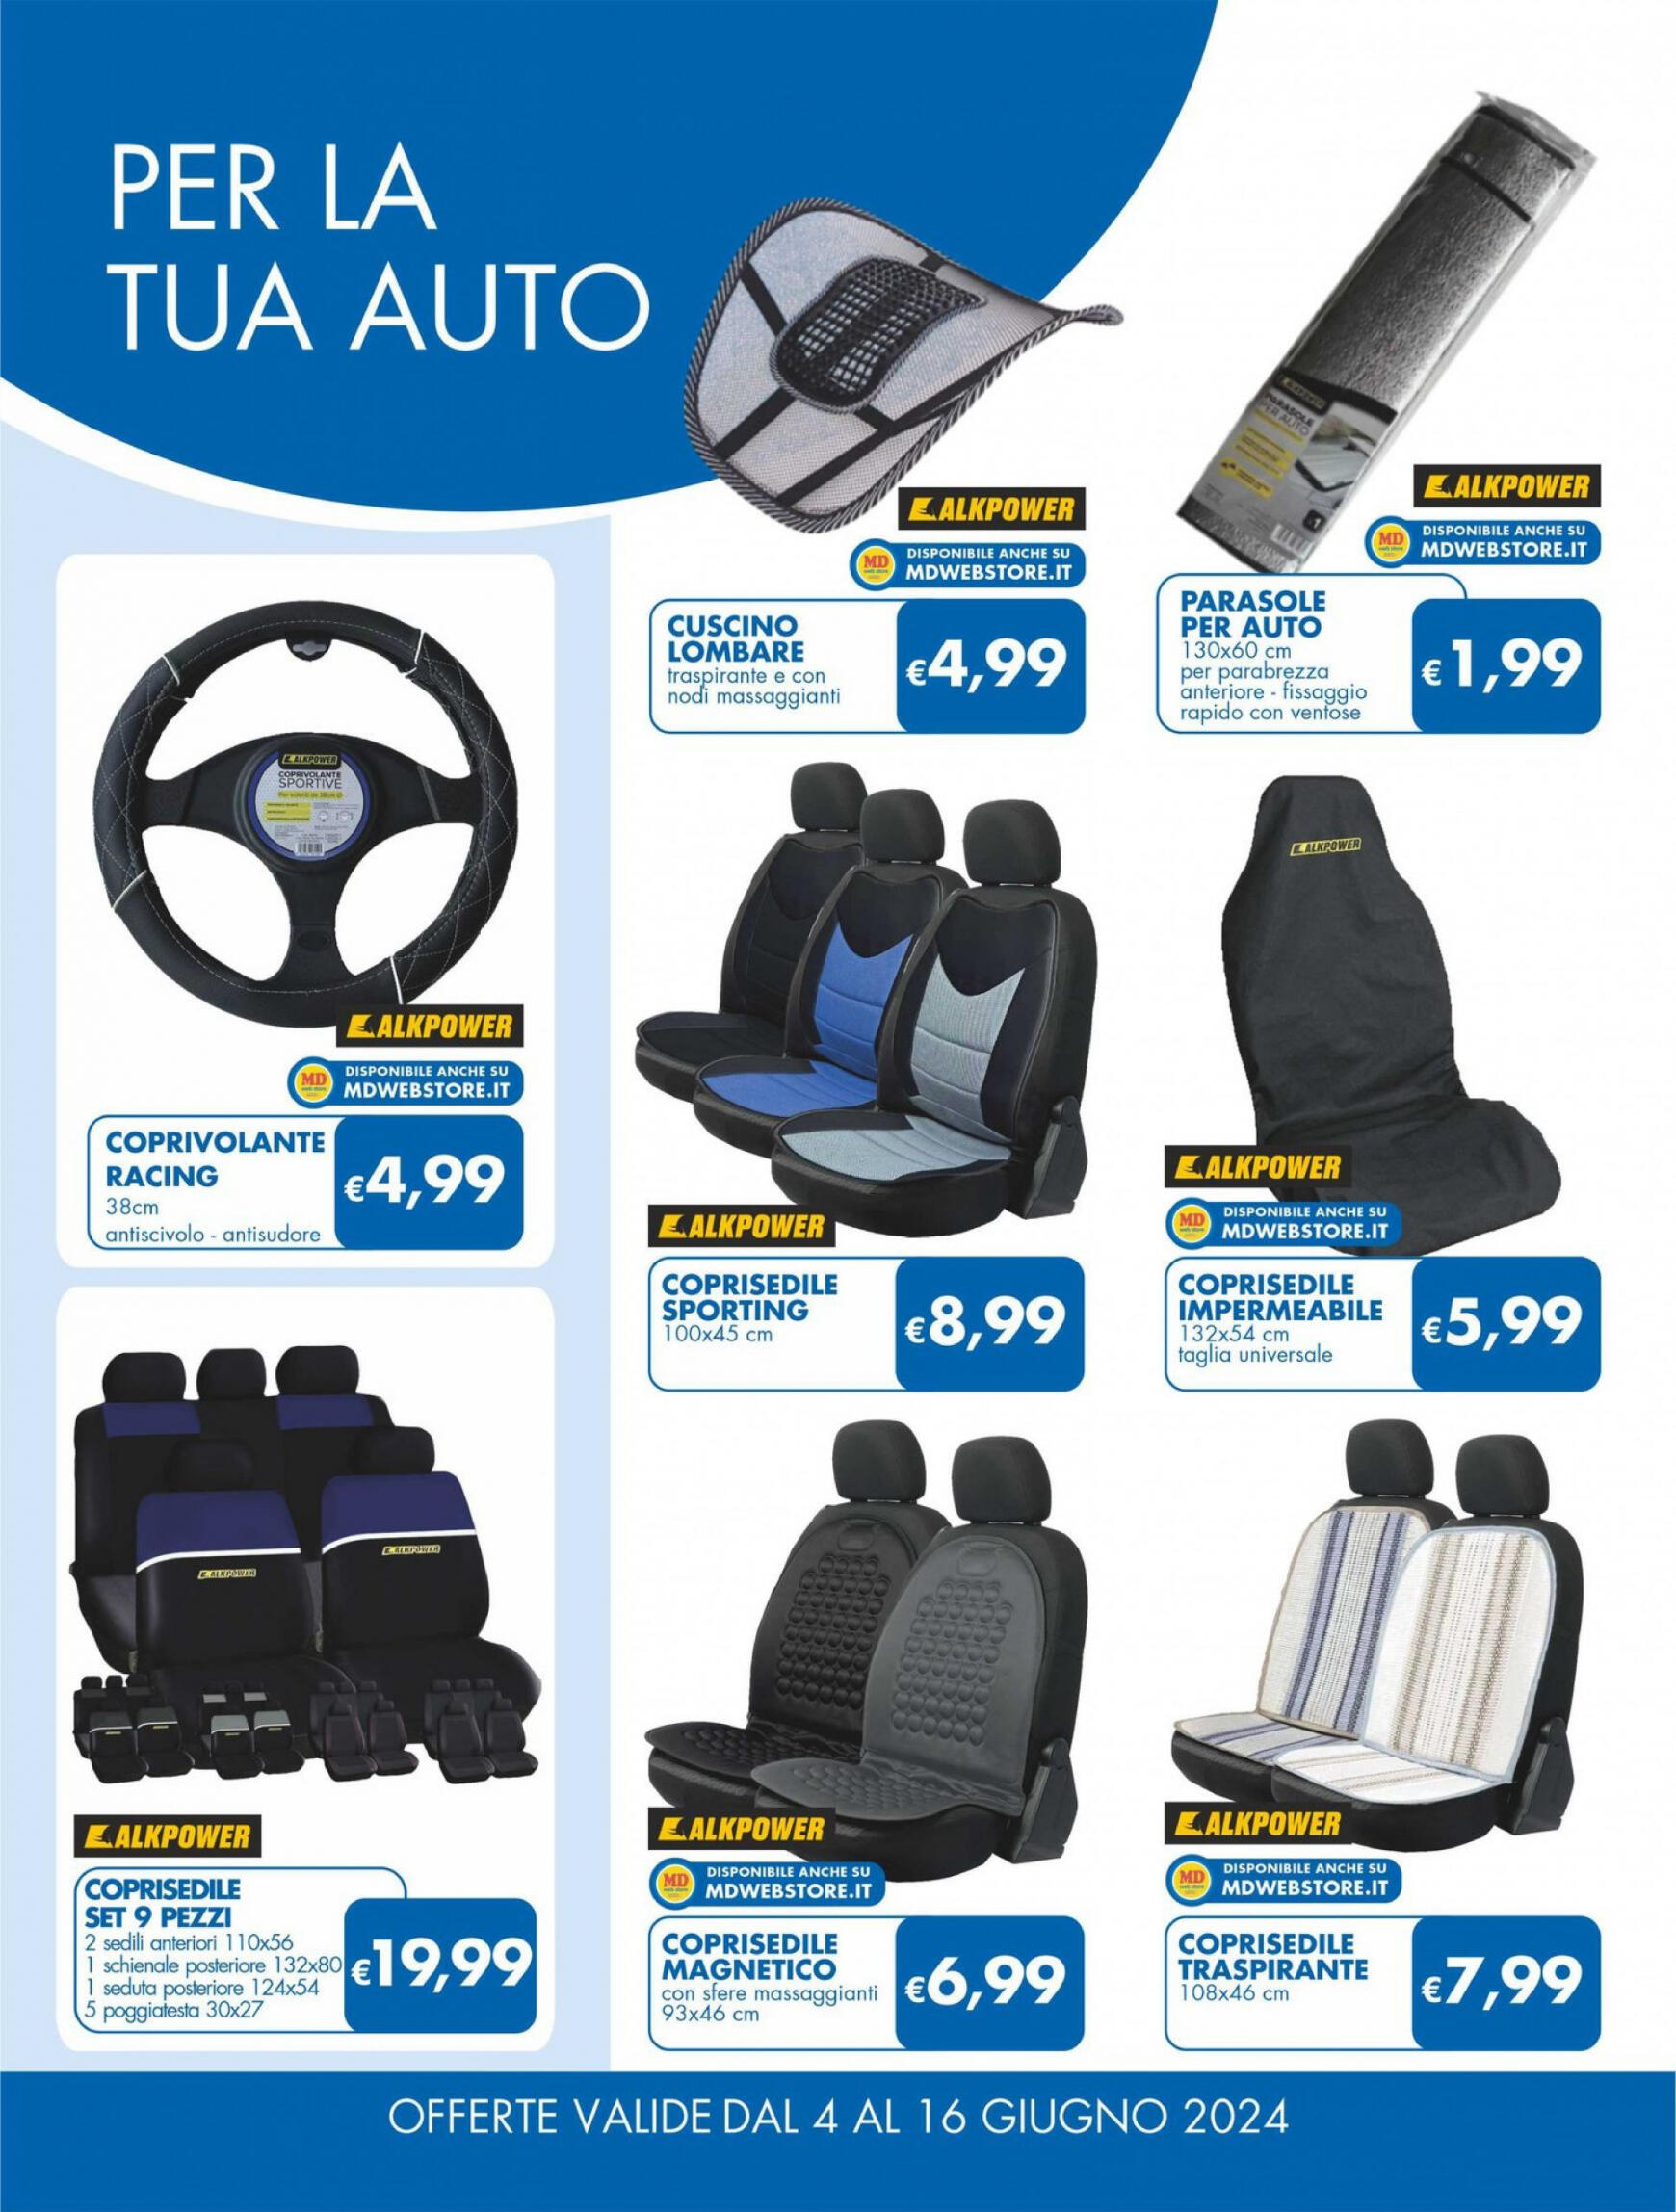 md-discount - Nuovo volantino MD 04.06. - 16.06. - page: 30